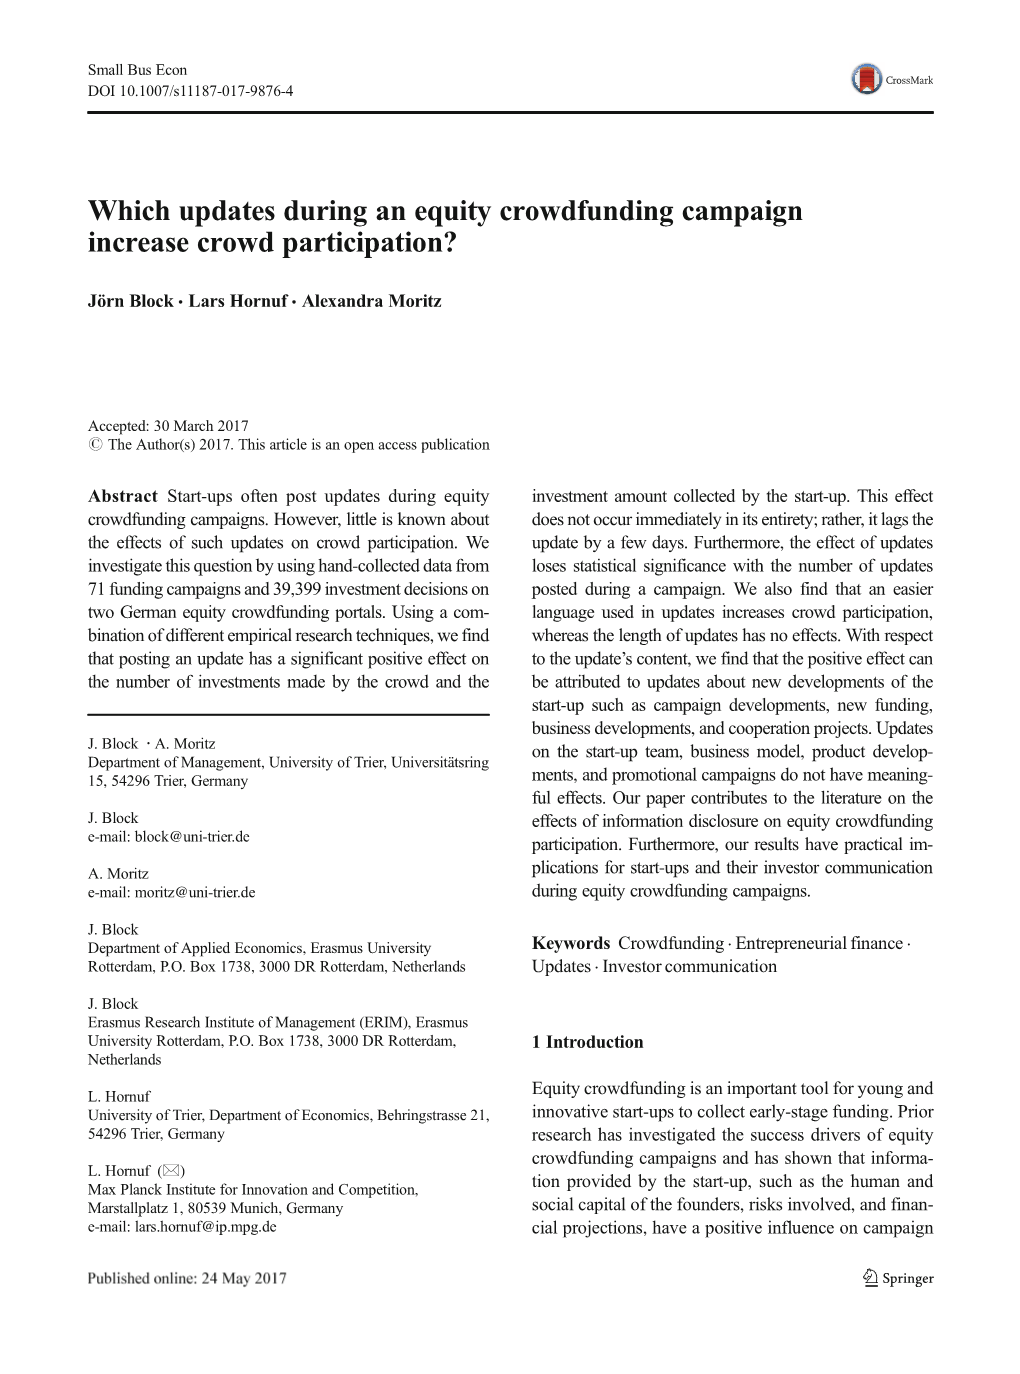 Which Updates During an Equity Crowdfunding Campaign Increase Crowd Participation?